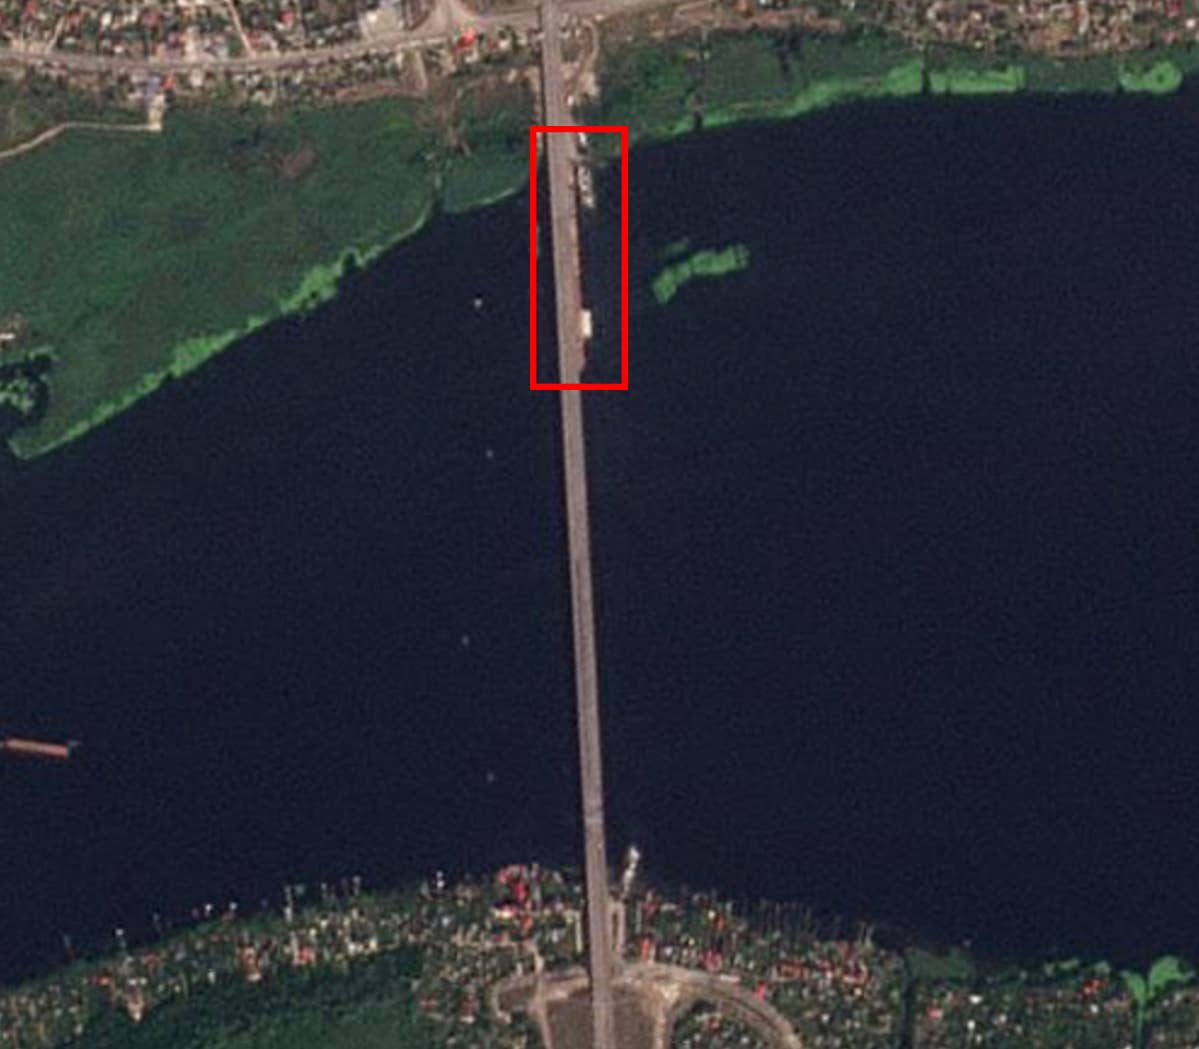 The beginning of a pontoon bridge can be seen alongside the Antonovsky Bridge on the north bank of the Dnipro River. <em>PHOTO © 2022 PLANET LABS INC. ALL RIGHTS RESERVED. REPRINTED BY PERMISSION</em>